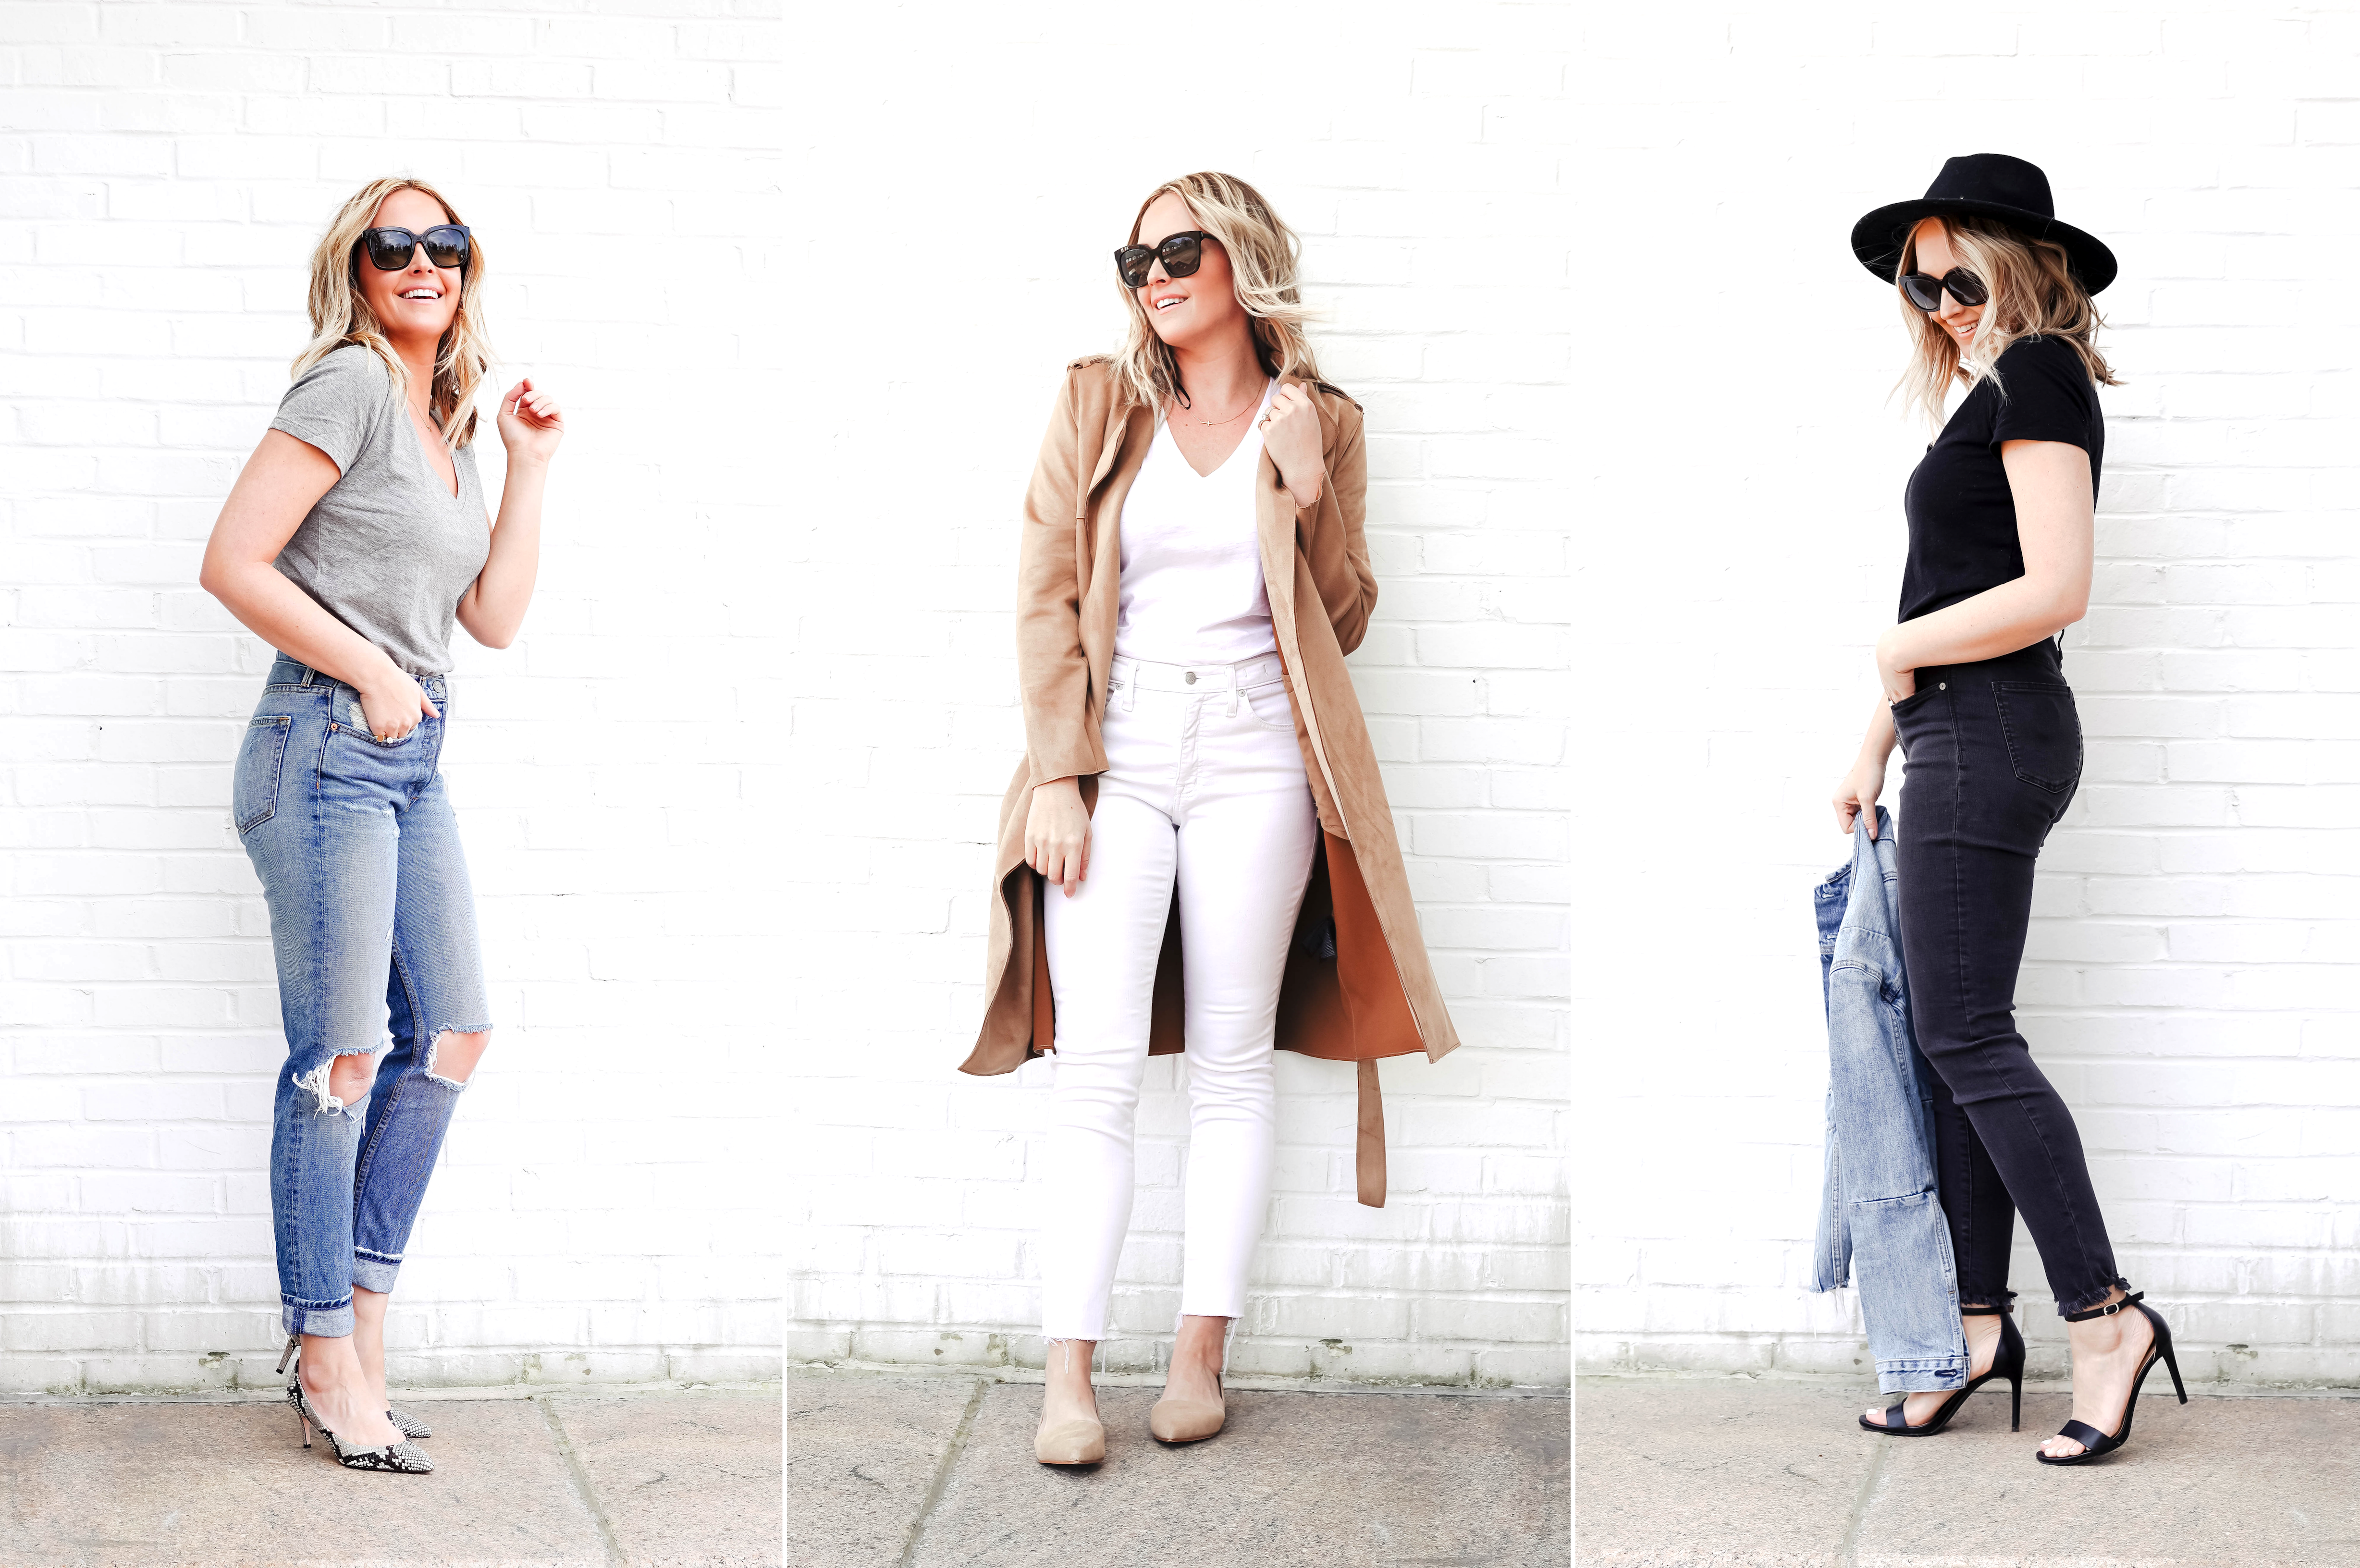 3 Ways To Dress Up Jeans and a T-Shirt